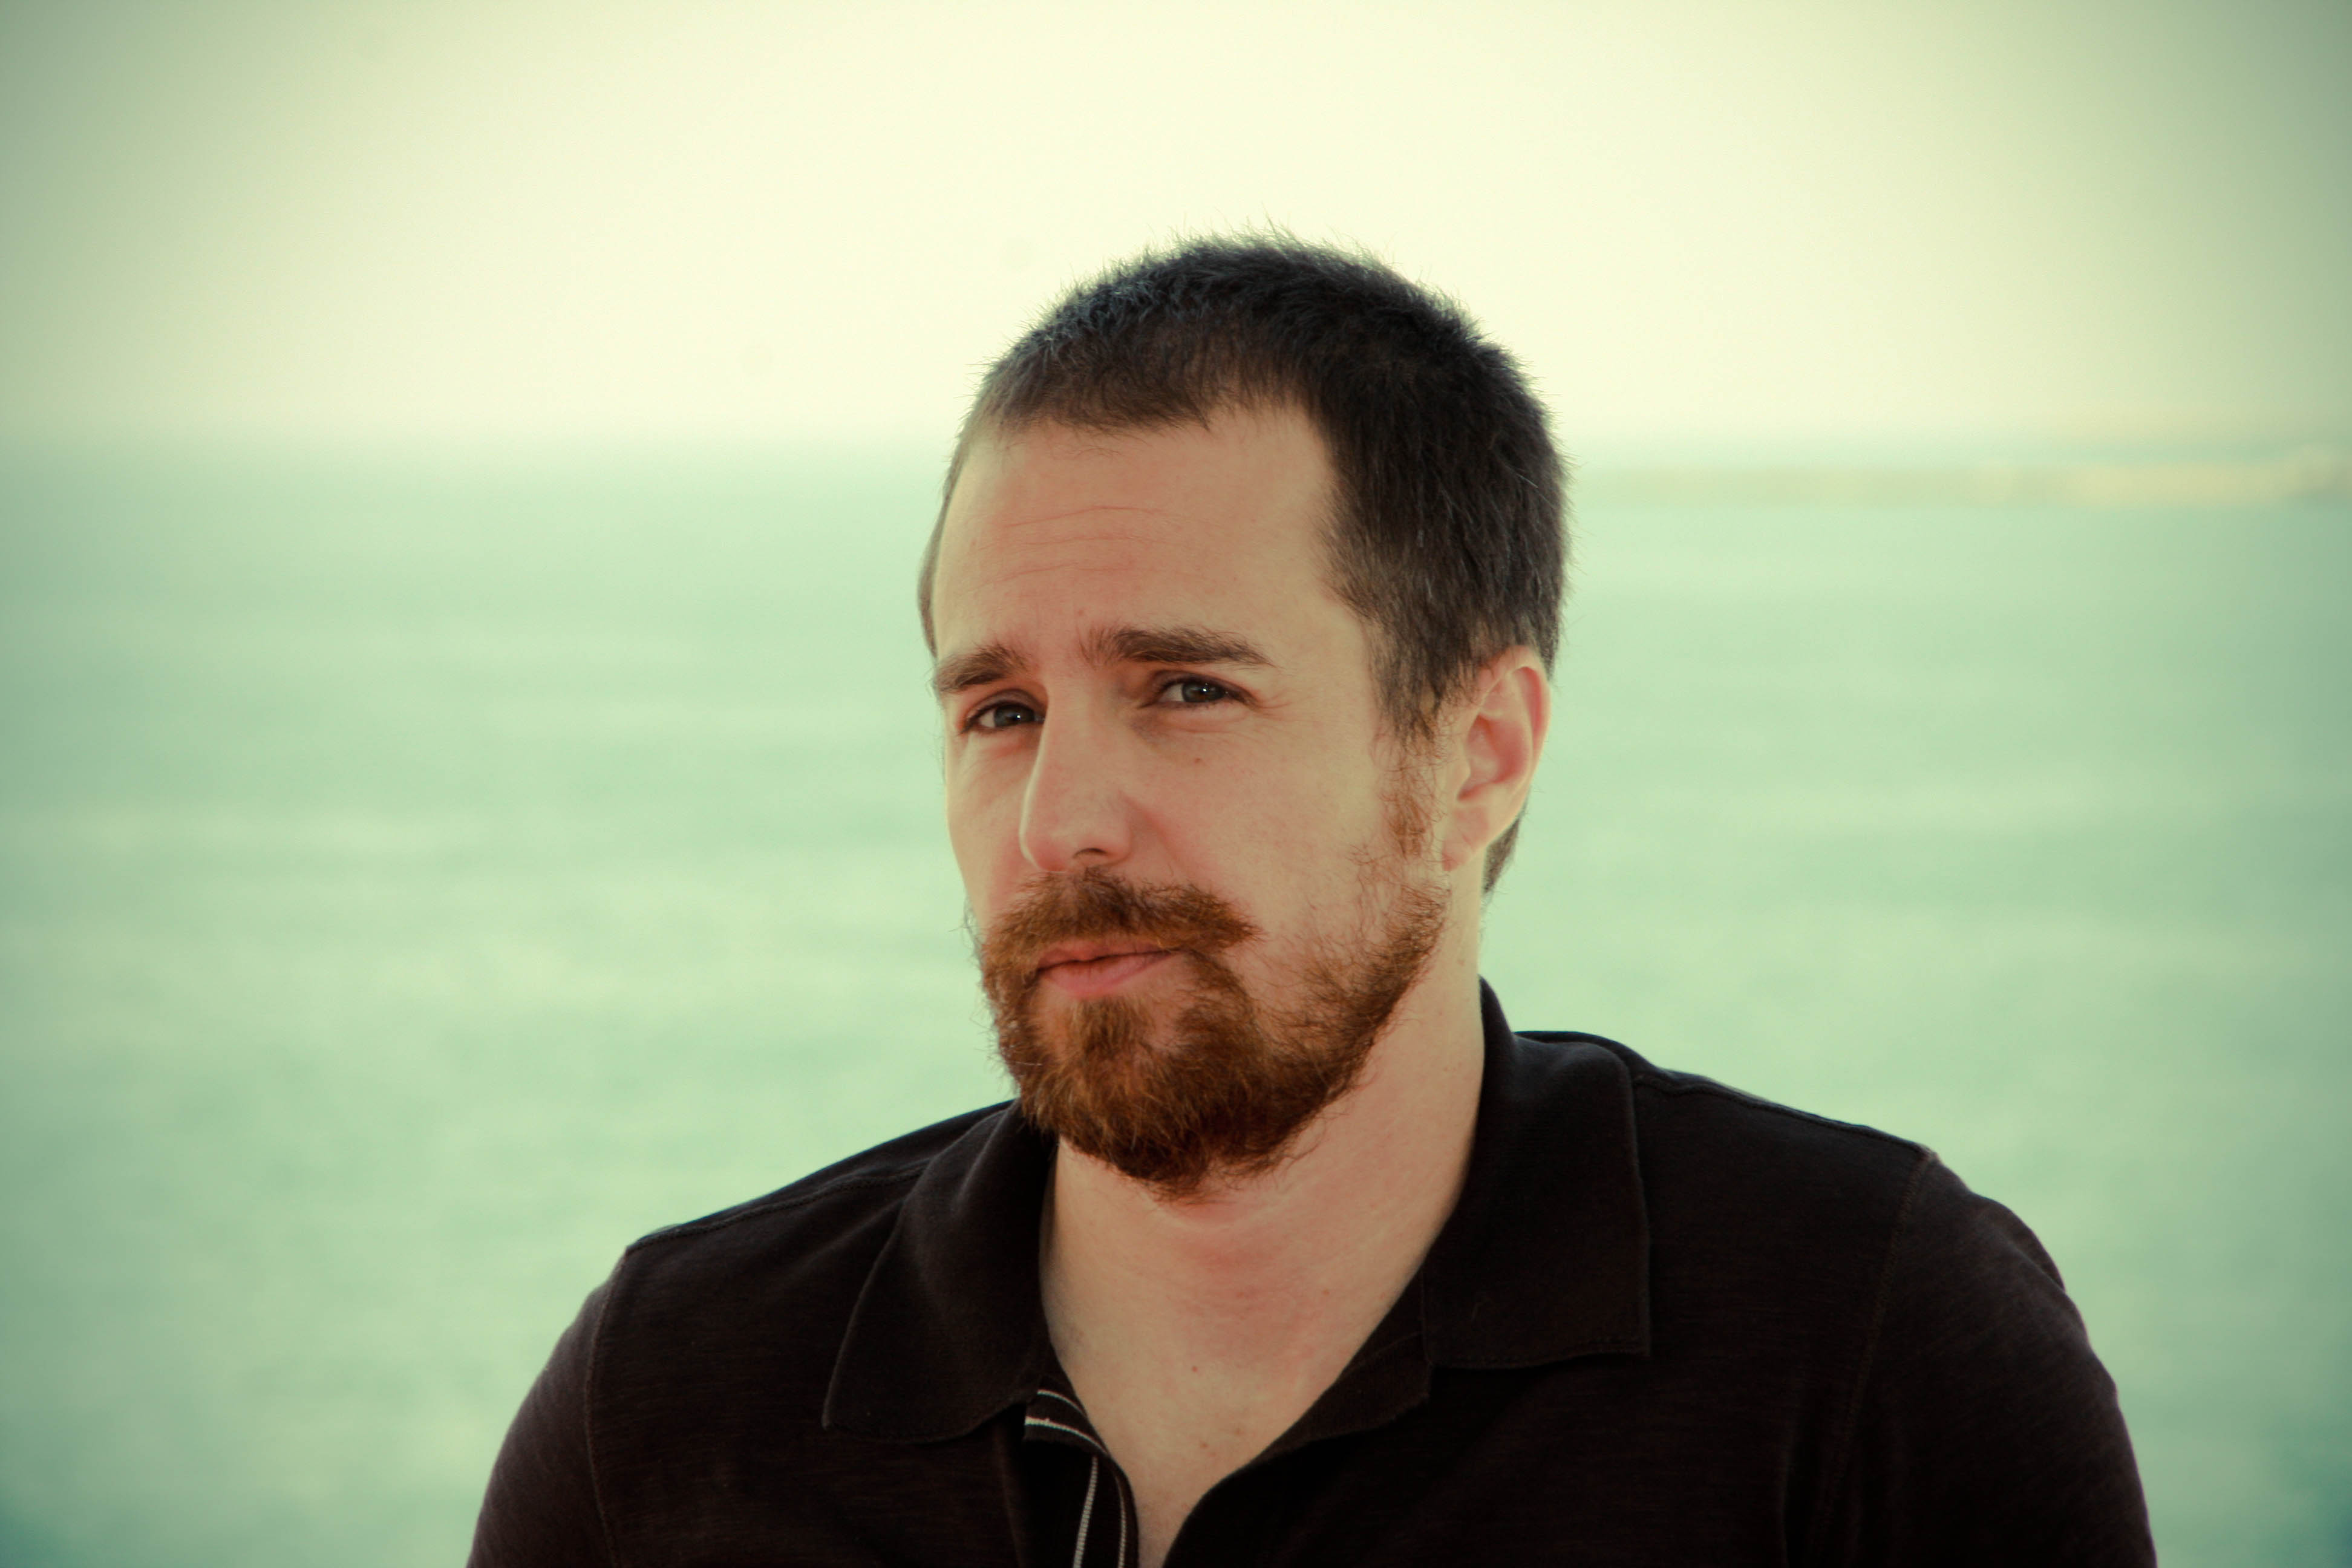 Sam Rockwell Backgrounds, Compatible - PC, Mobile, Gadgets| 3888x2592 px